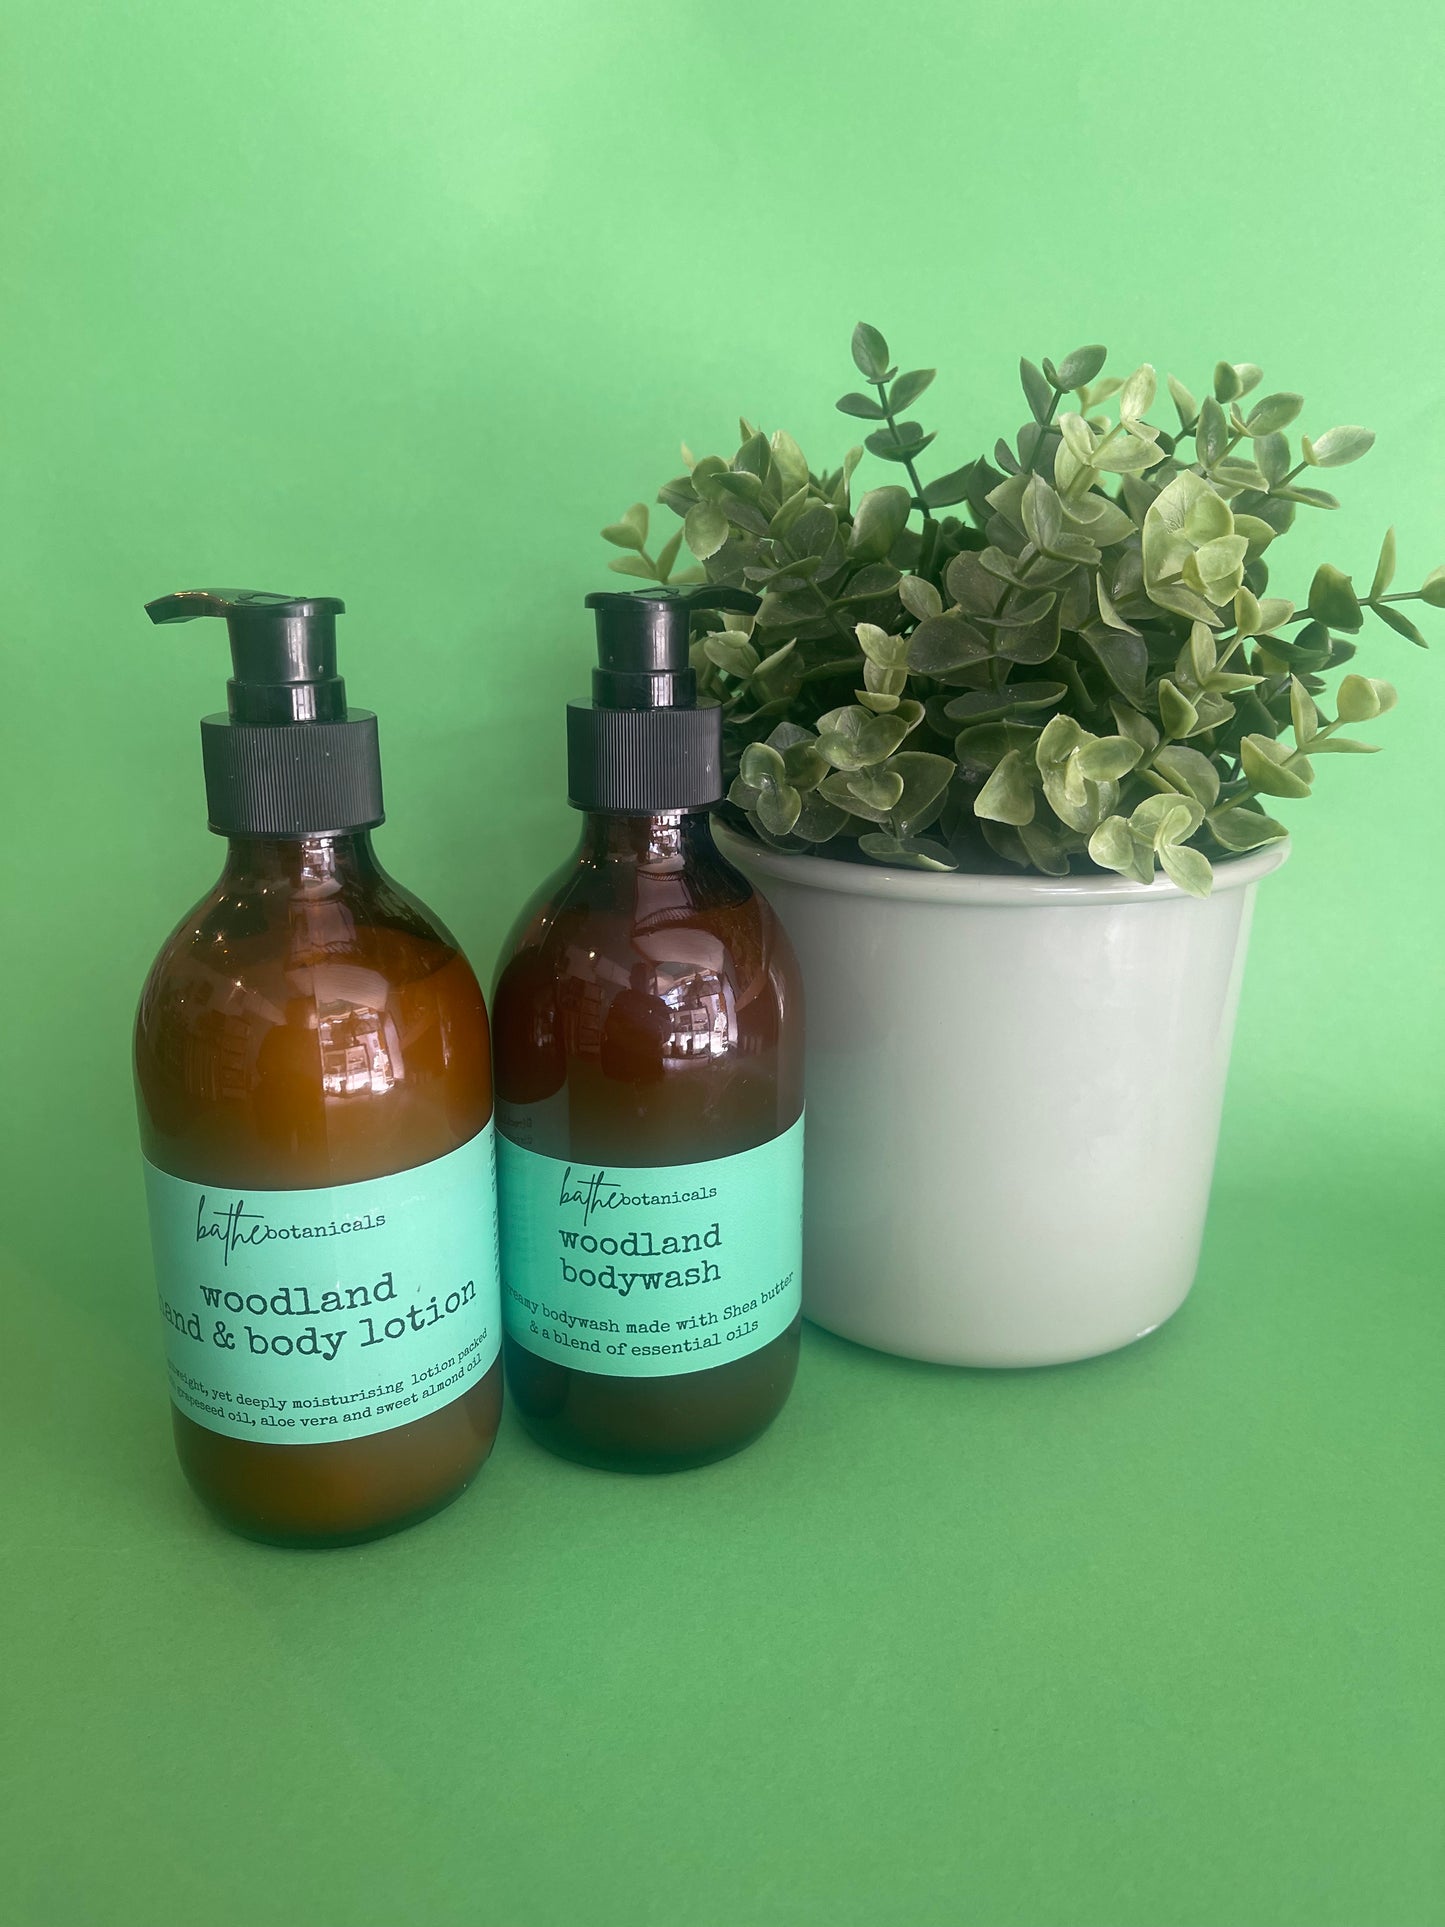 Woodland hand and body lotion